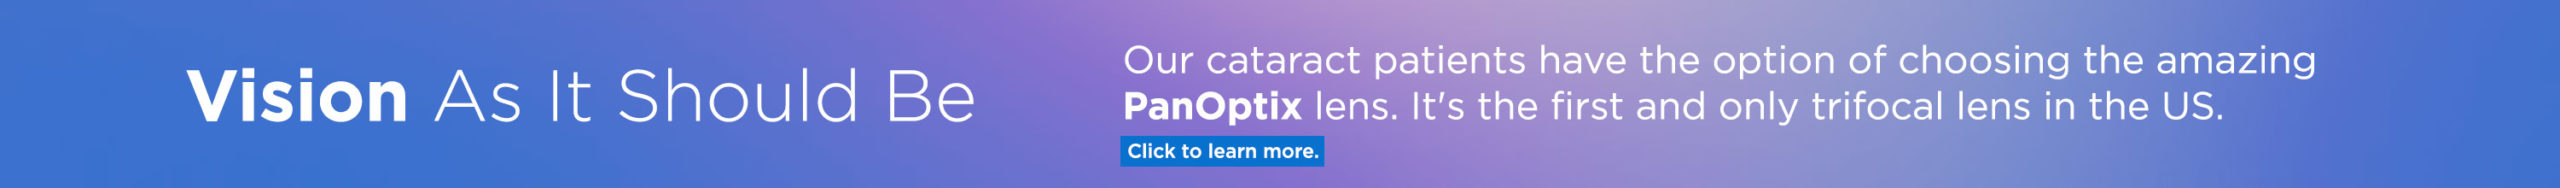 Banner for PanOptix Lens - first and only trifocal lens in the US